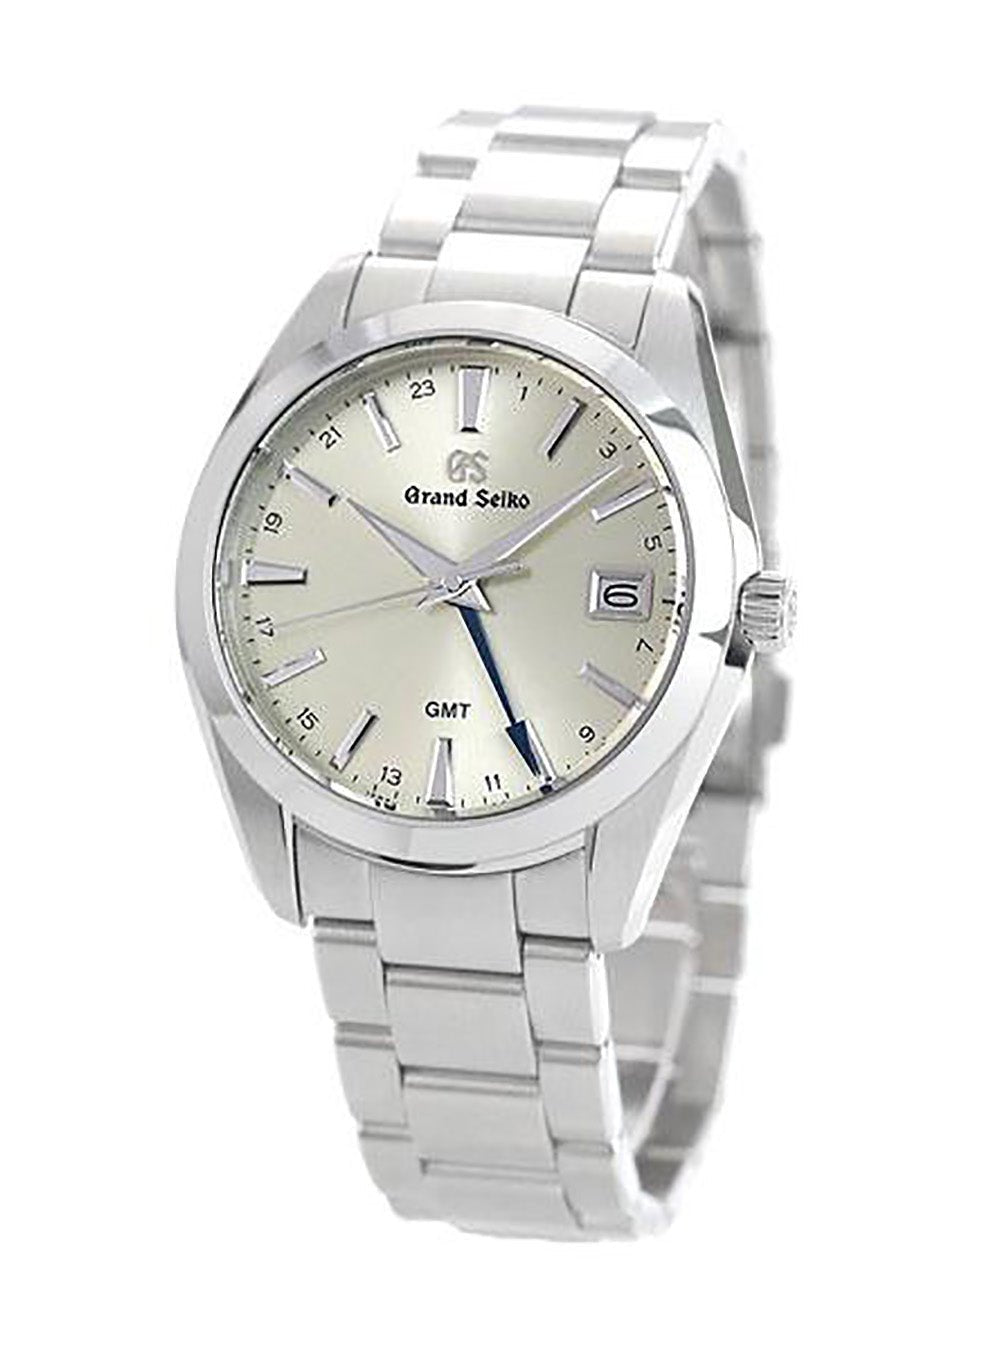 GRAND SEIKO HERITAGE COLLECTION SBGN011 MADE IN JAPAN JDM – japan-select